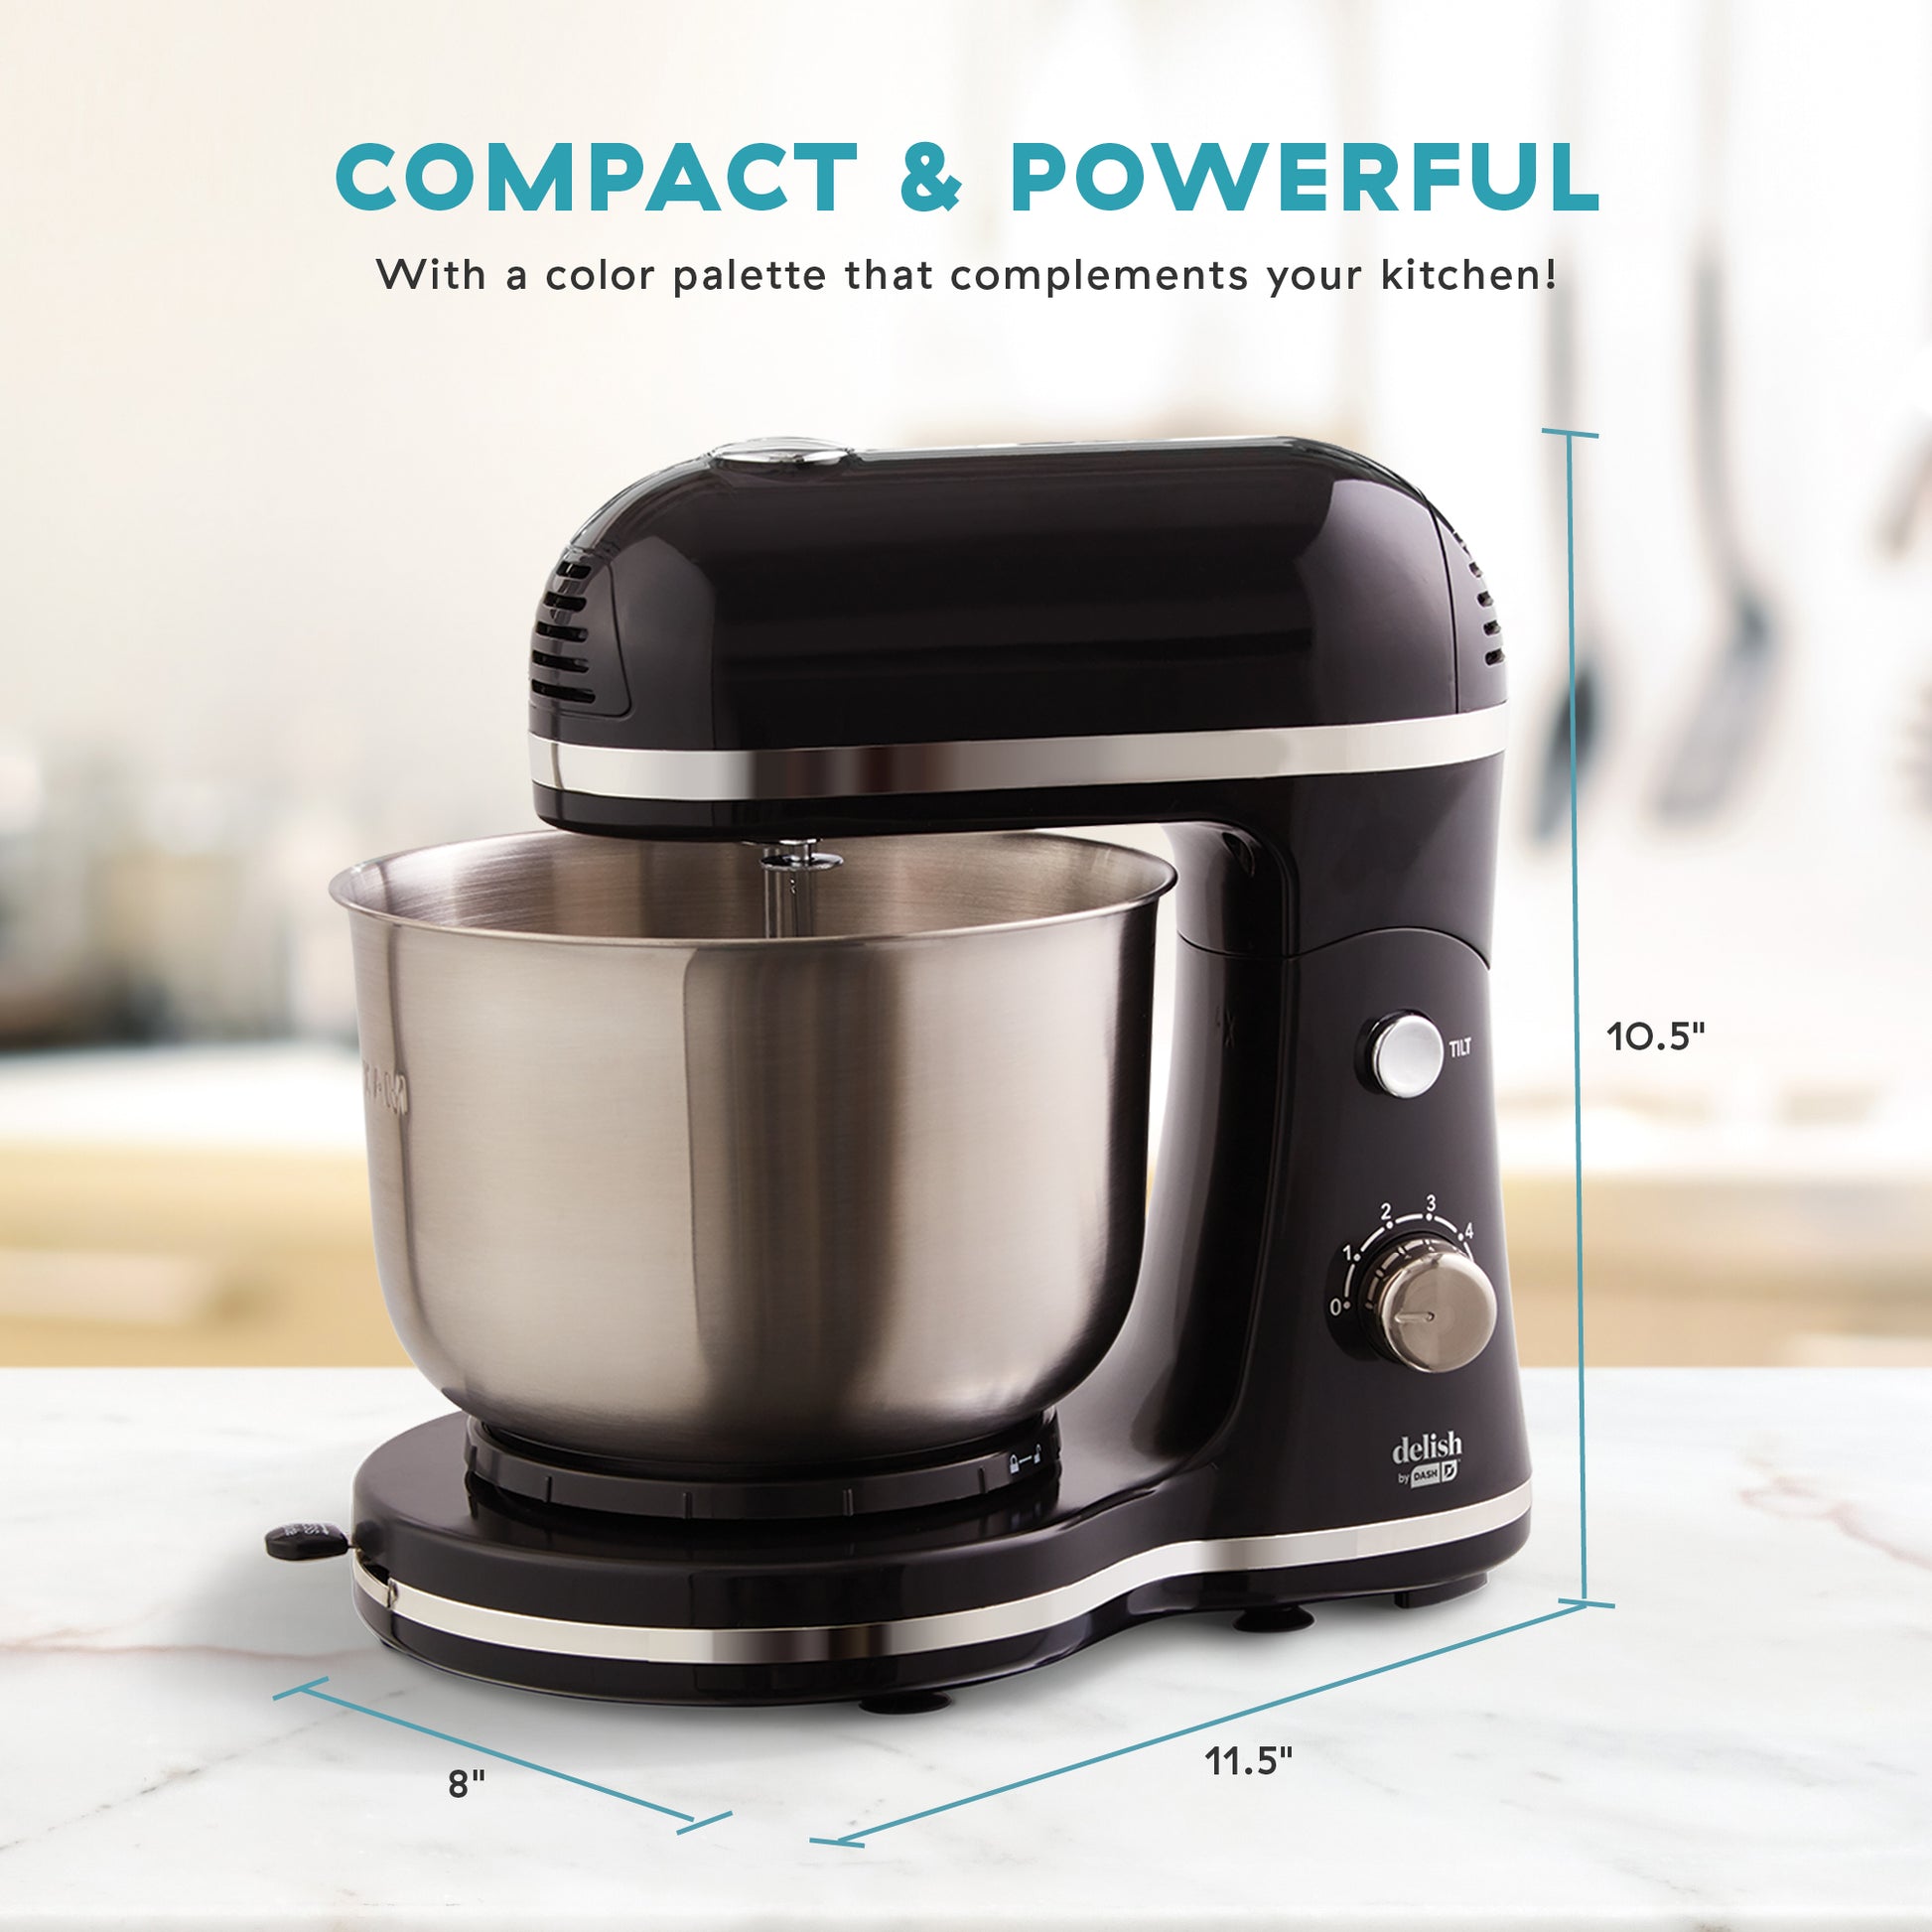 Stand Mixer, A Complete Stand Mixer For Your Home